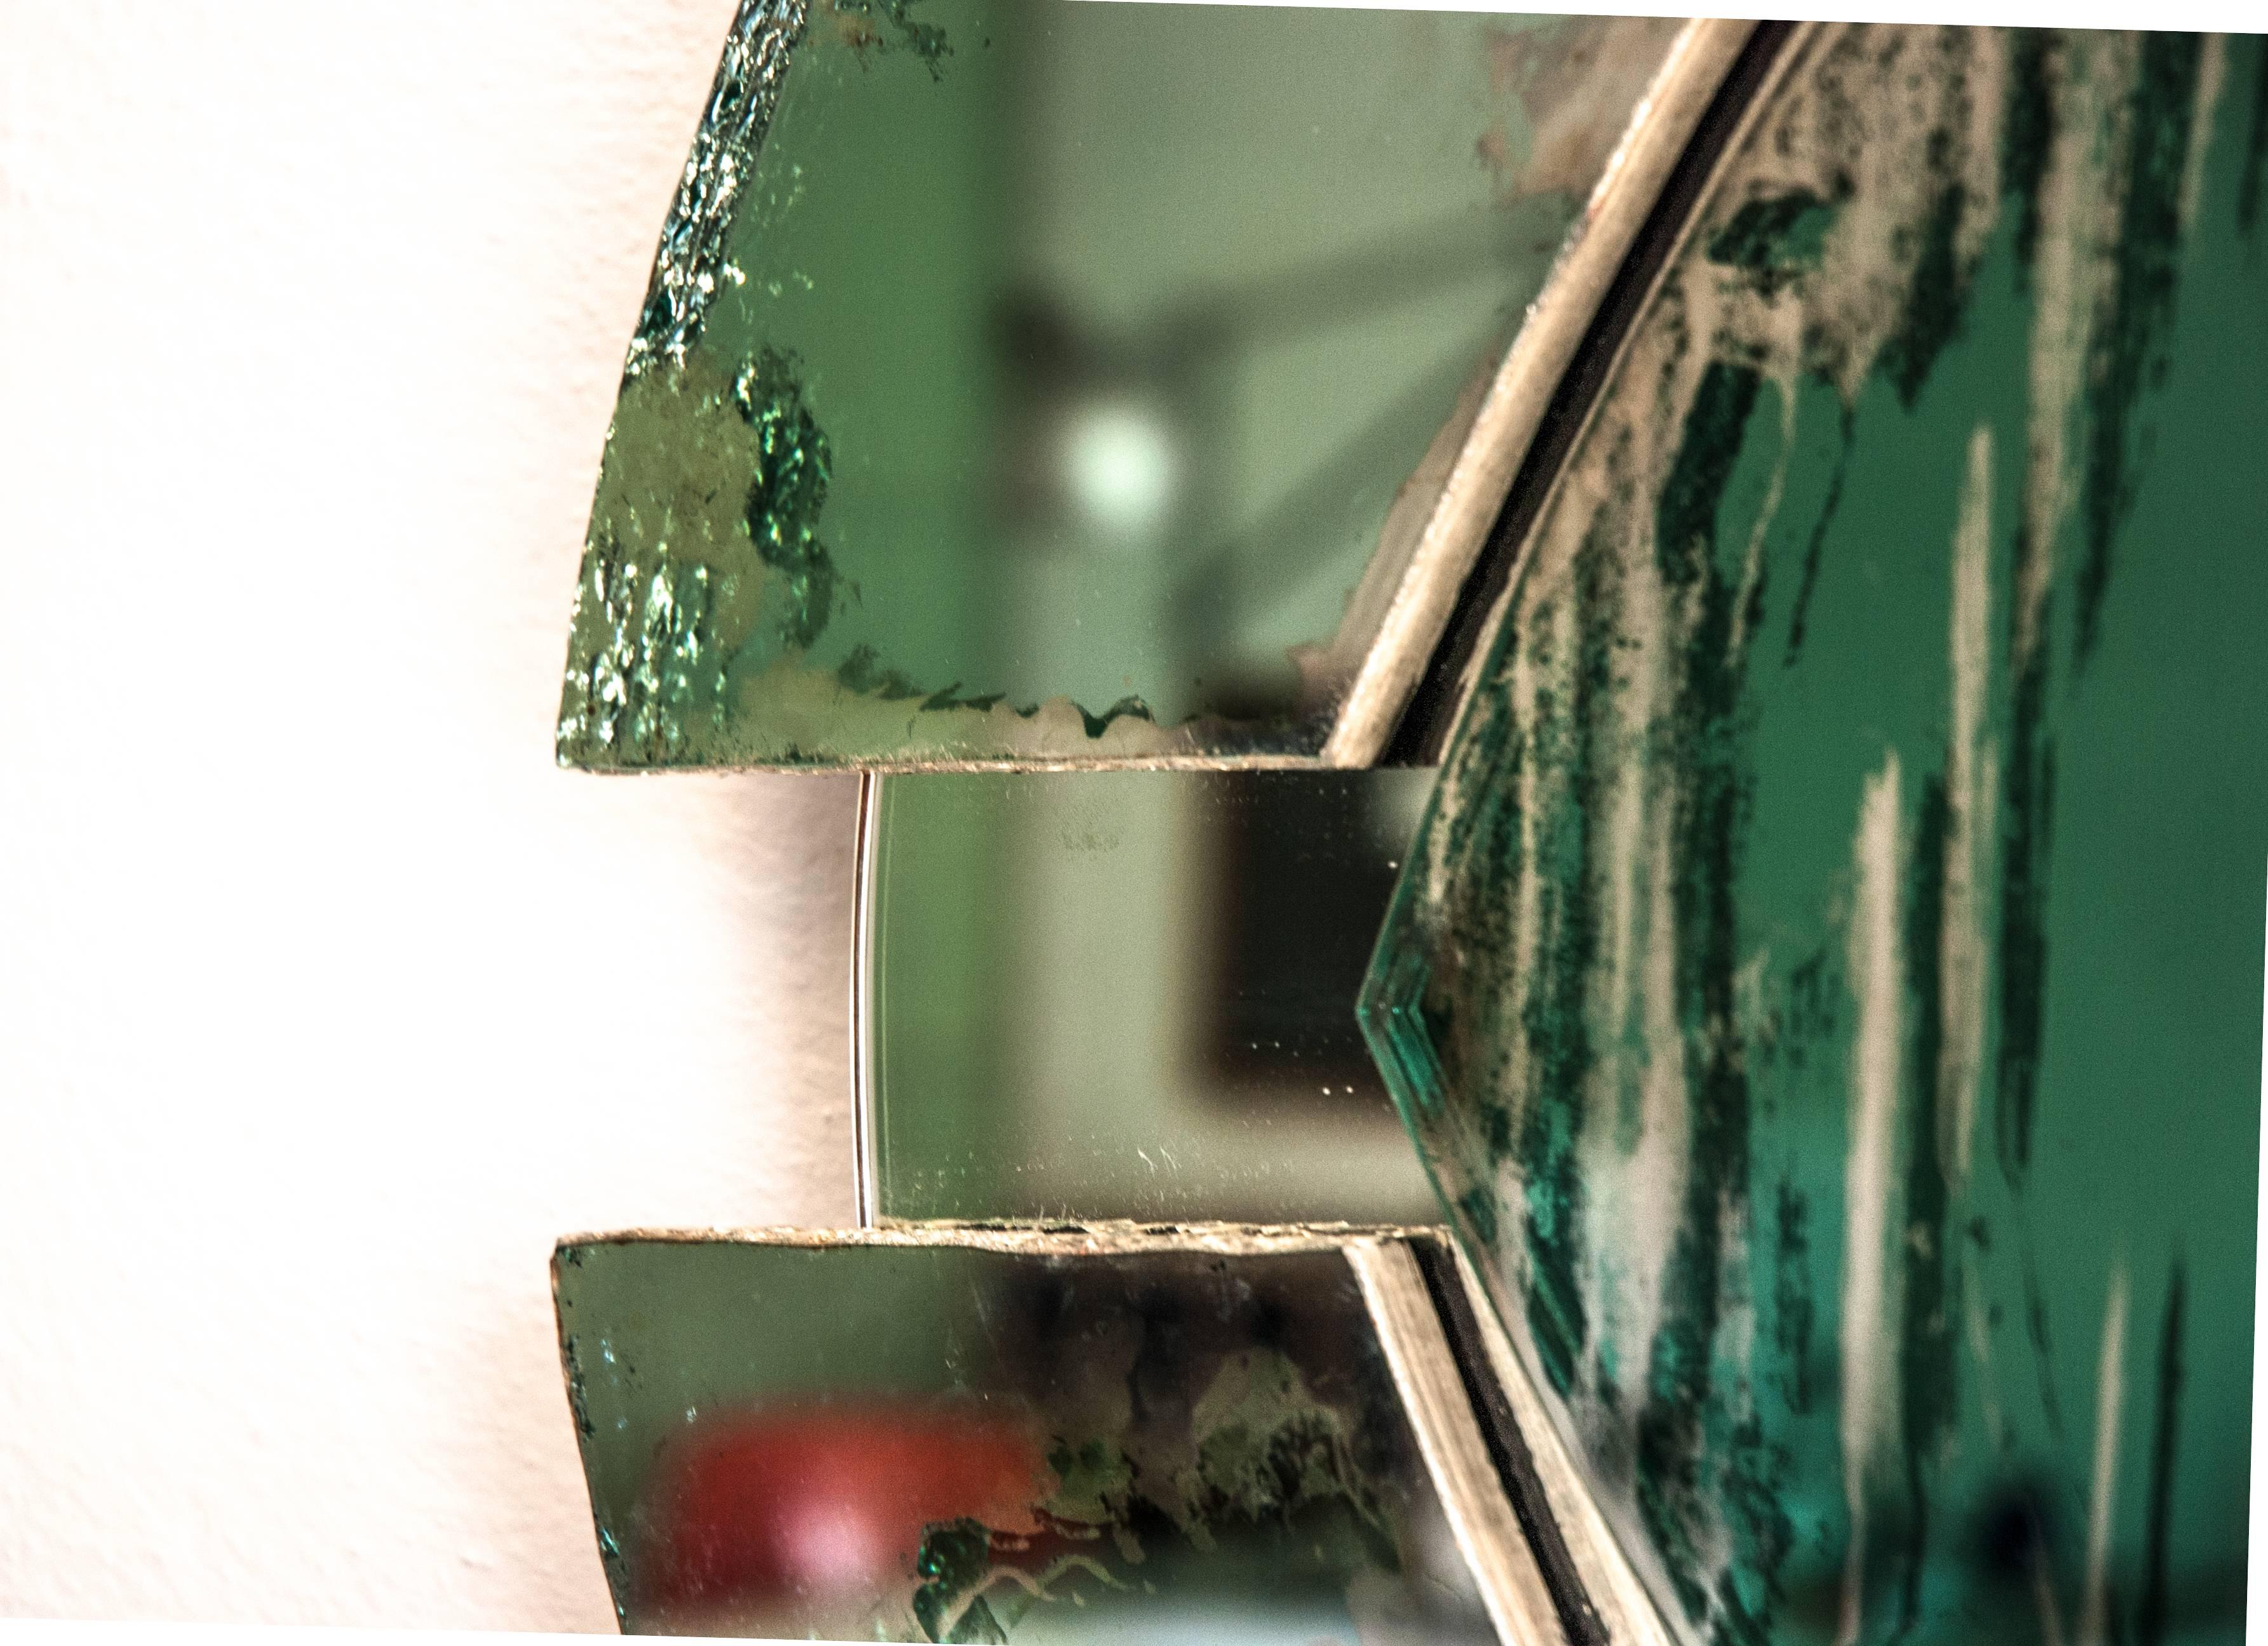 Italian Irys Wall Mirror with Jade Green Mirror Inside and Actual Mirror Outside